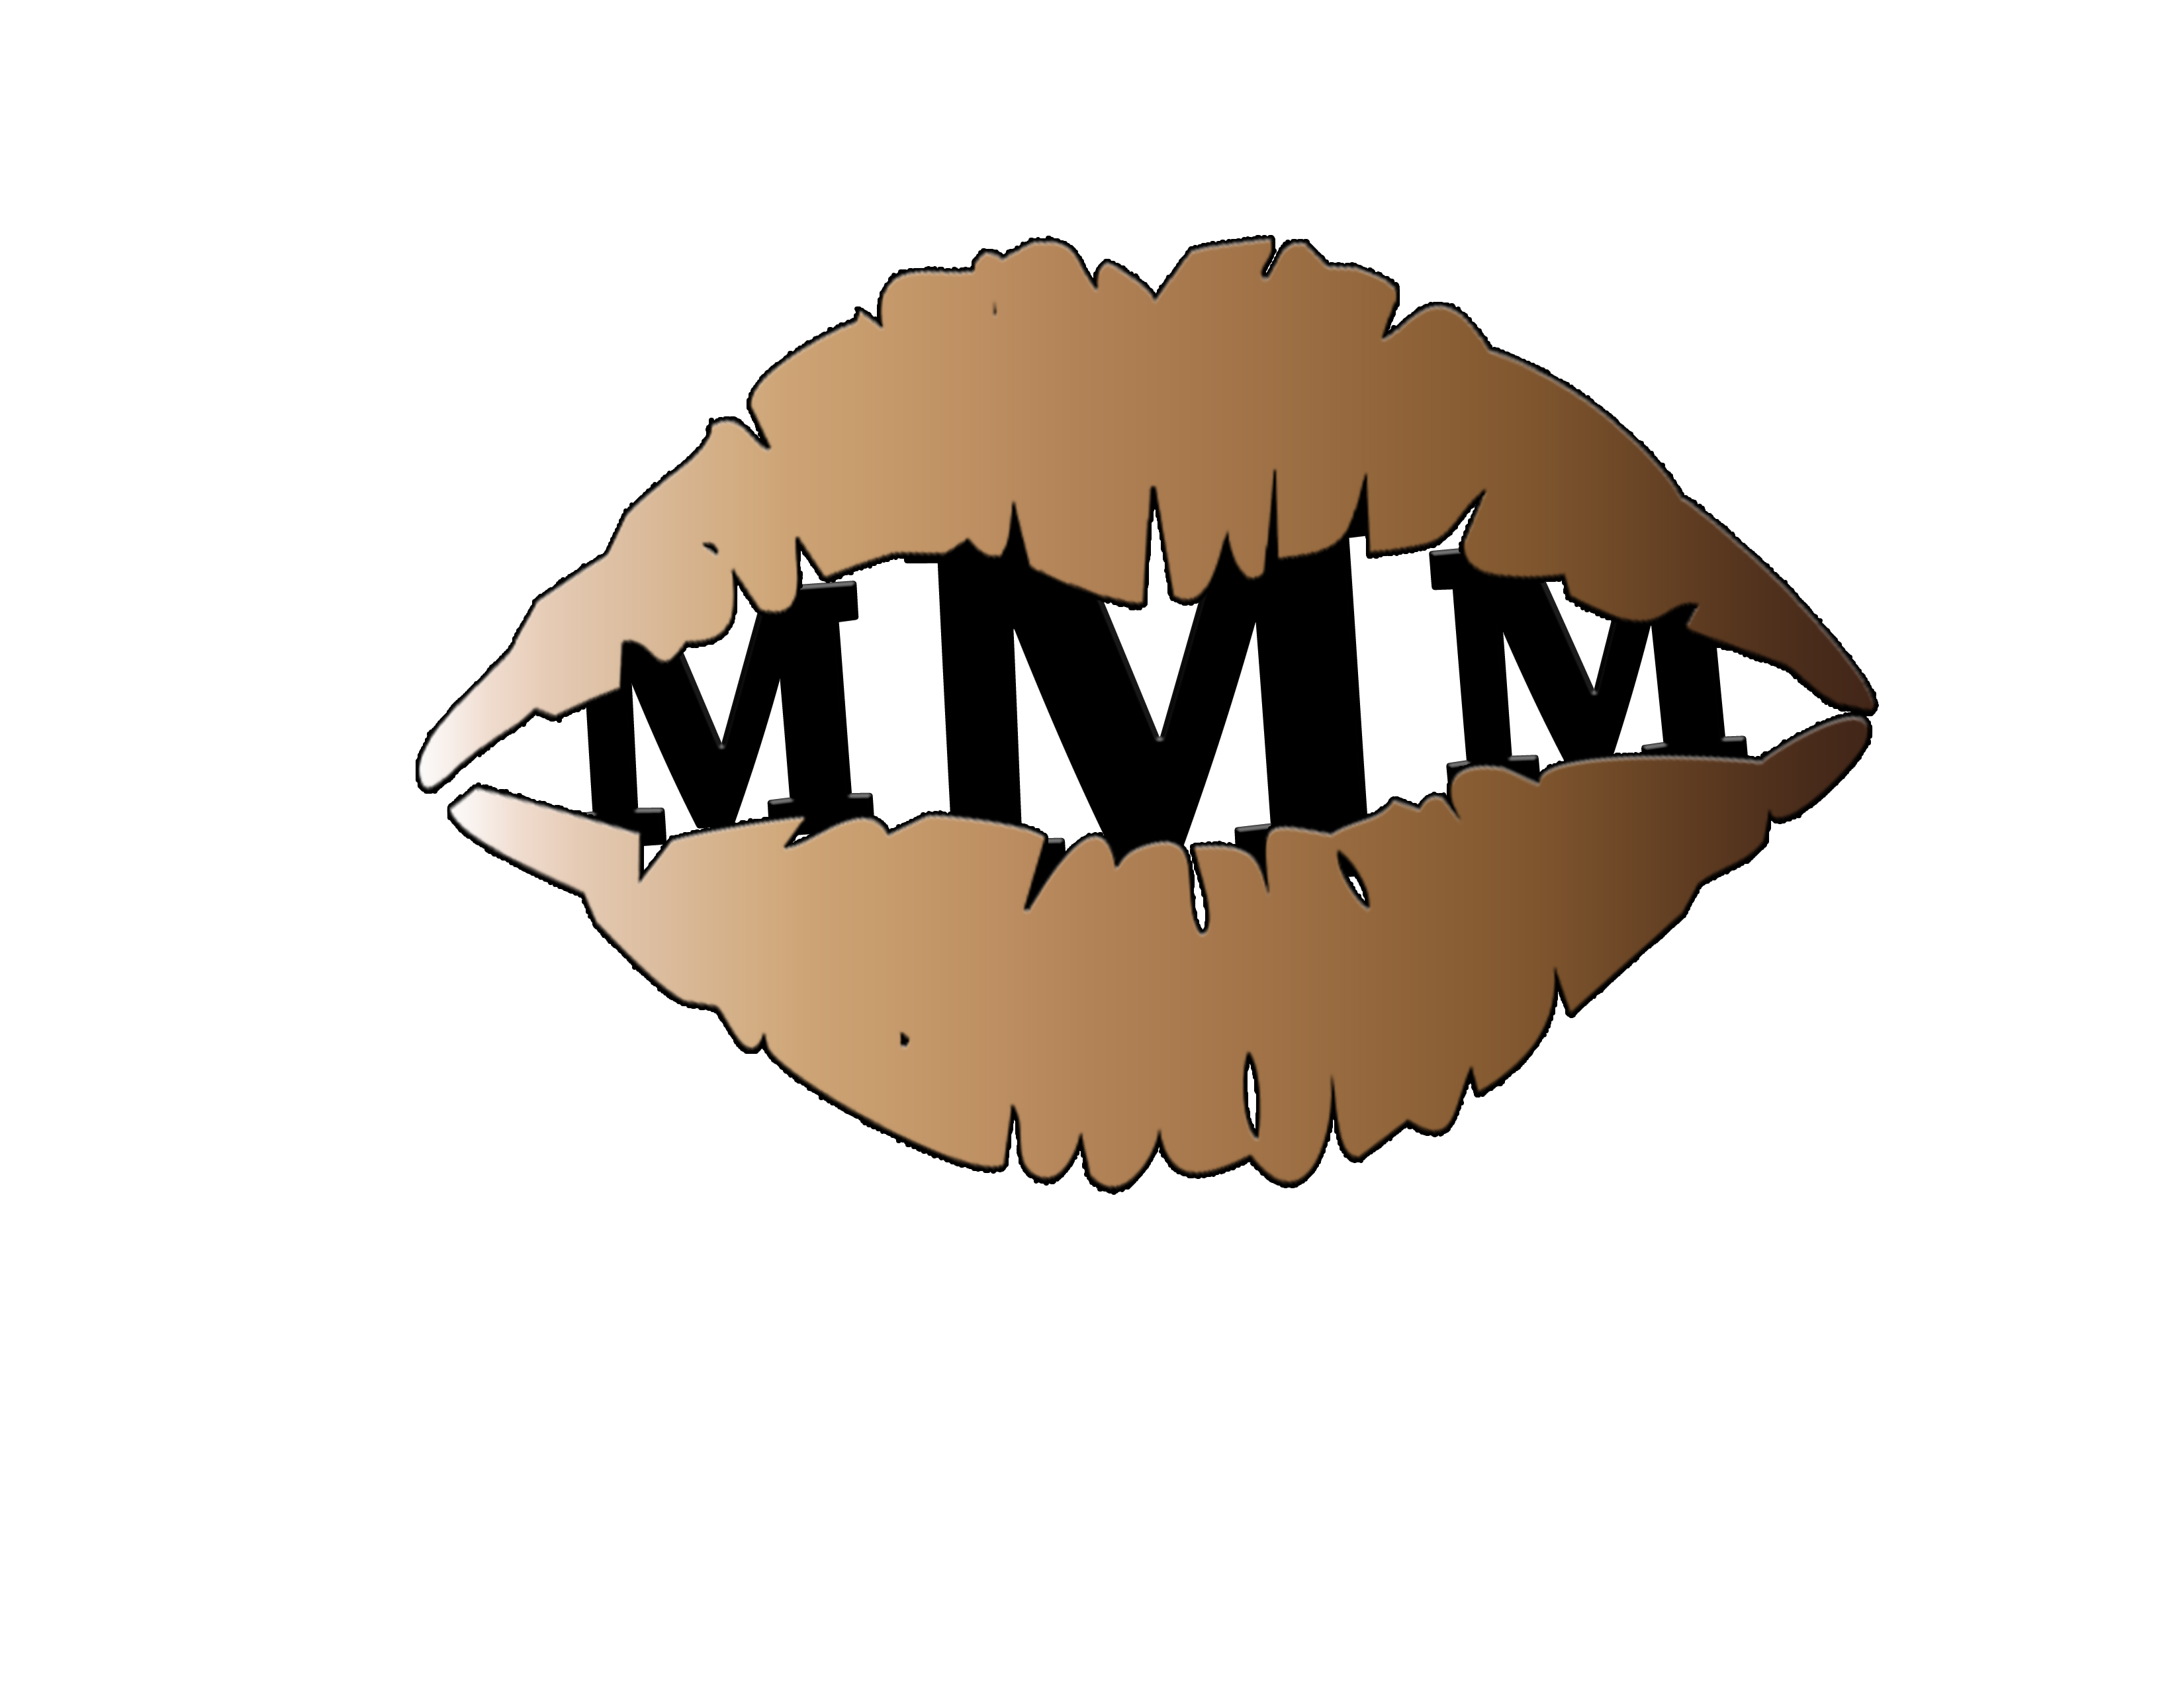 the official logo for PDDBM microaggressions